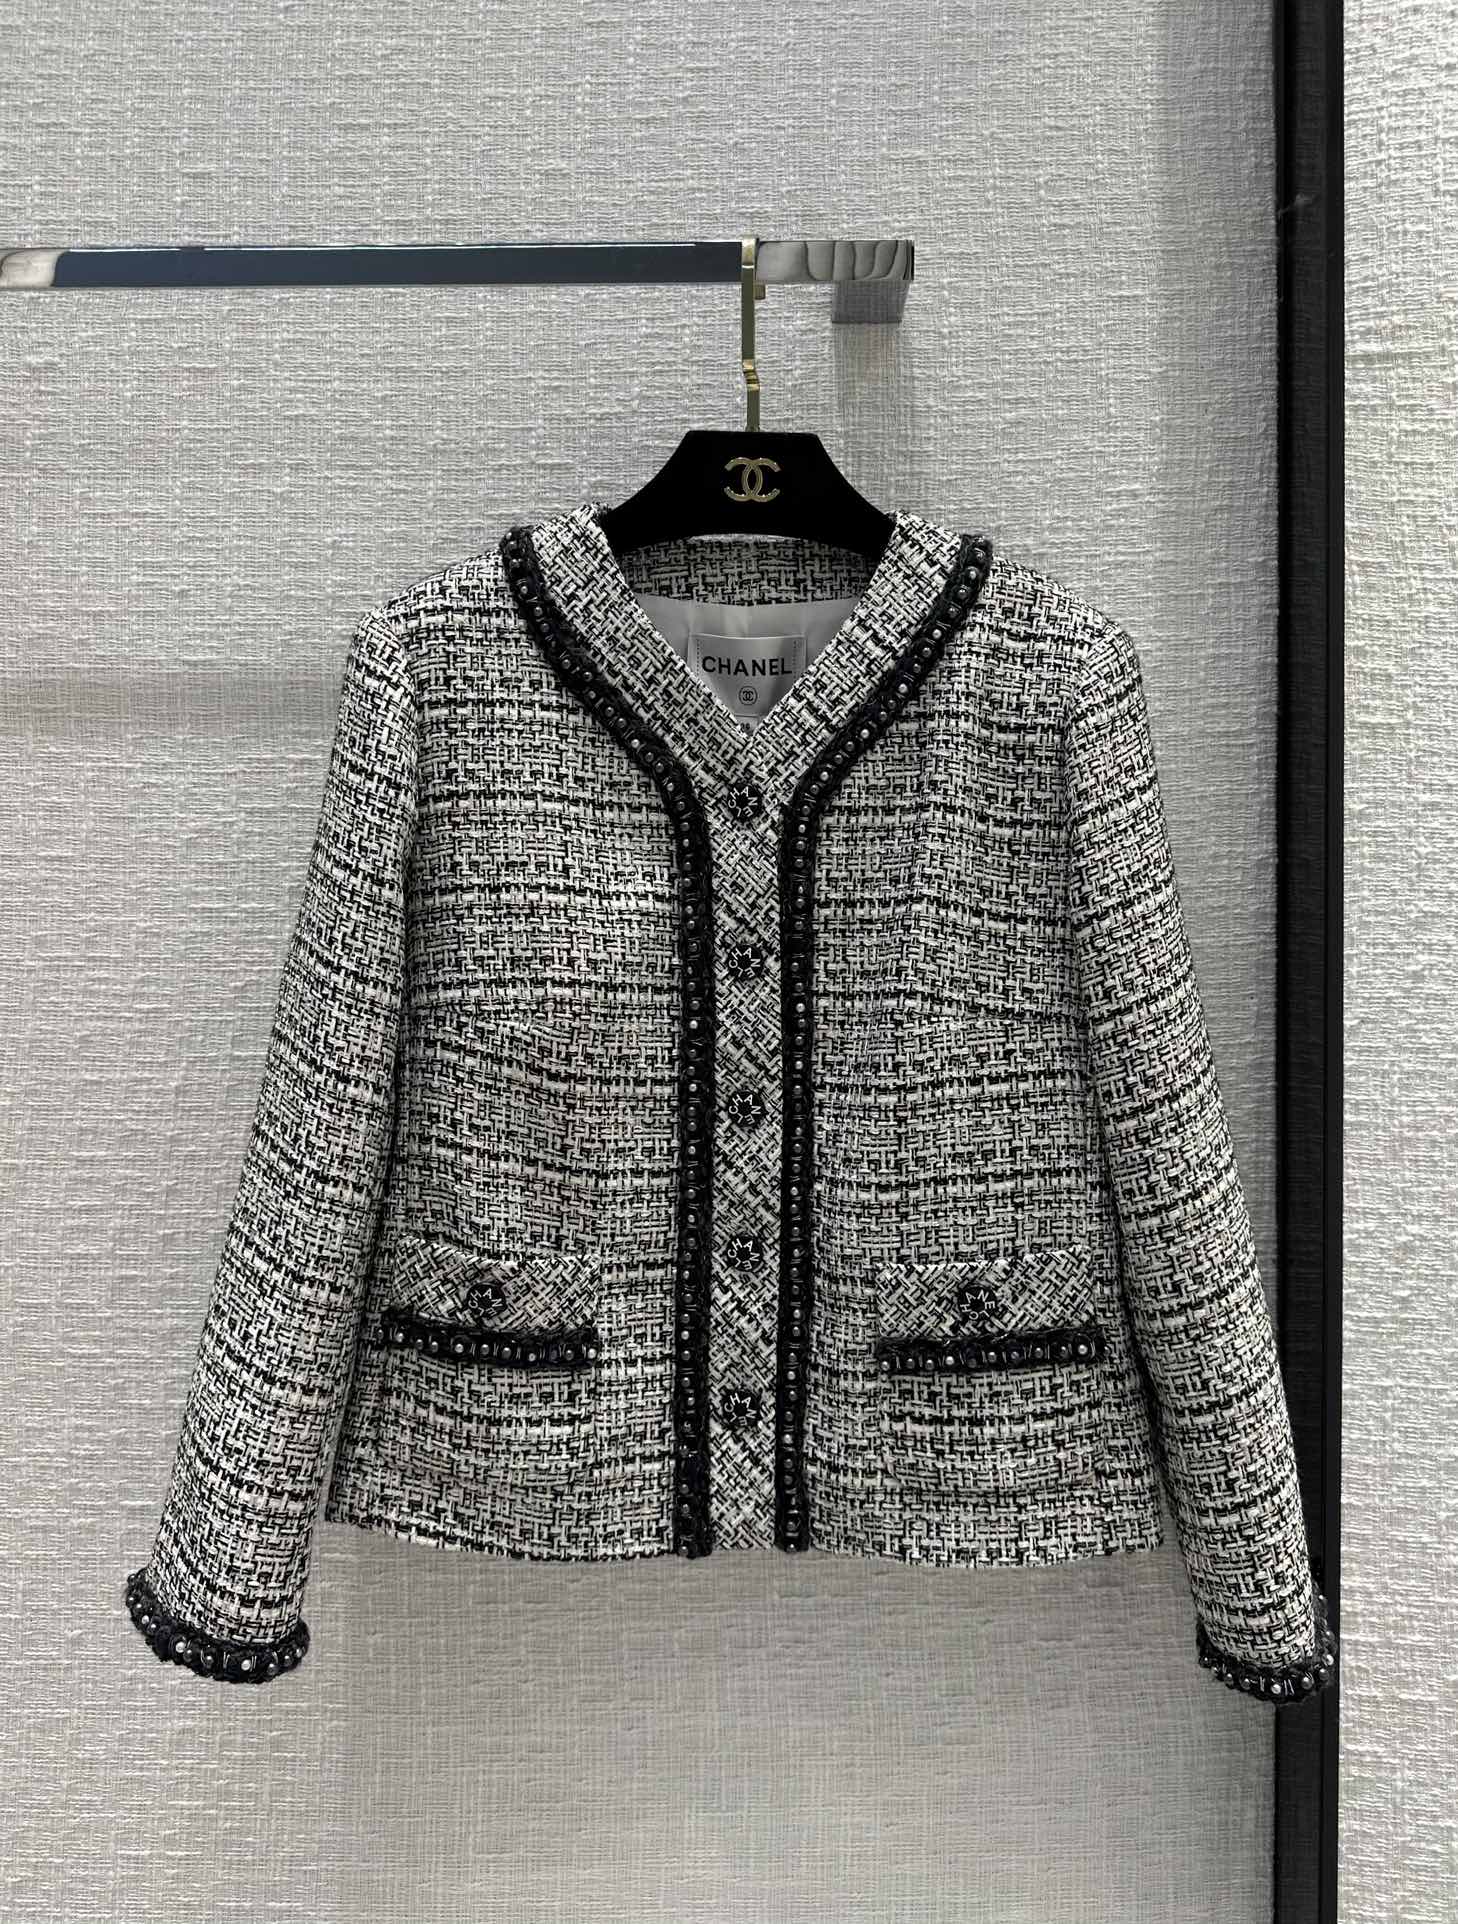 Chanel Clothing Coats & Jackets Black Blue Grey White Weave Spring/Summer Collection Vintage